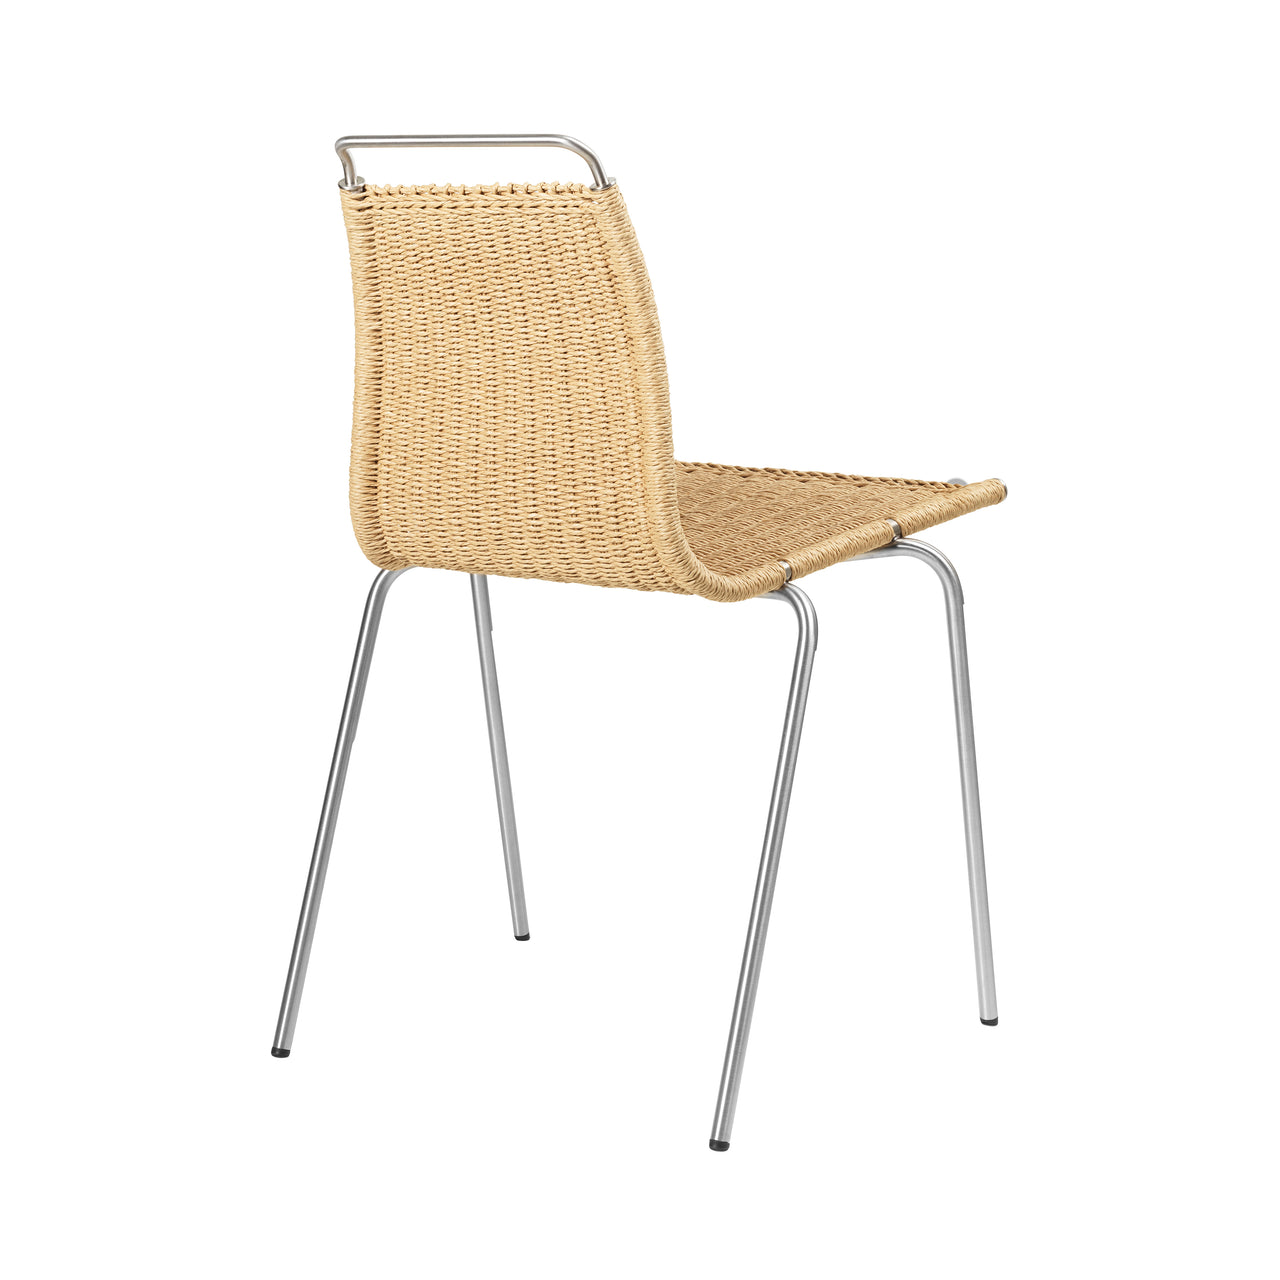 PK1 Chair: Stainless Steel